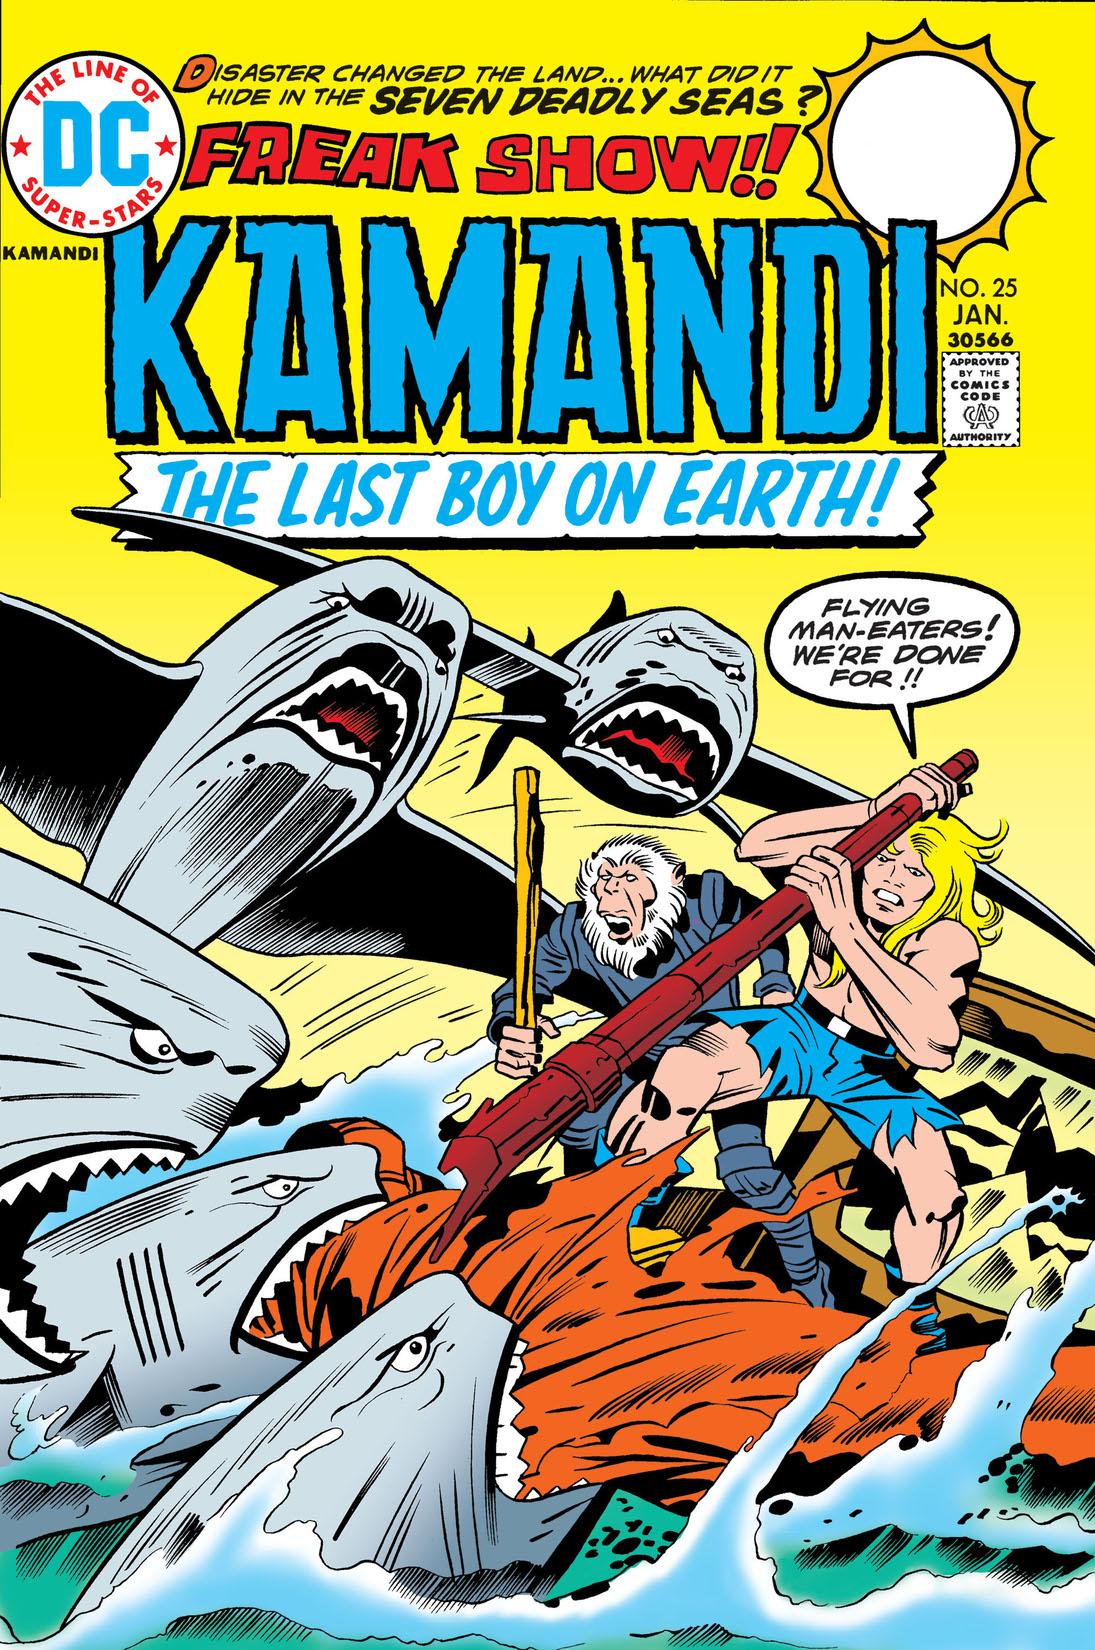 Kamandi: The Last Boy on Earth #25 preview images